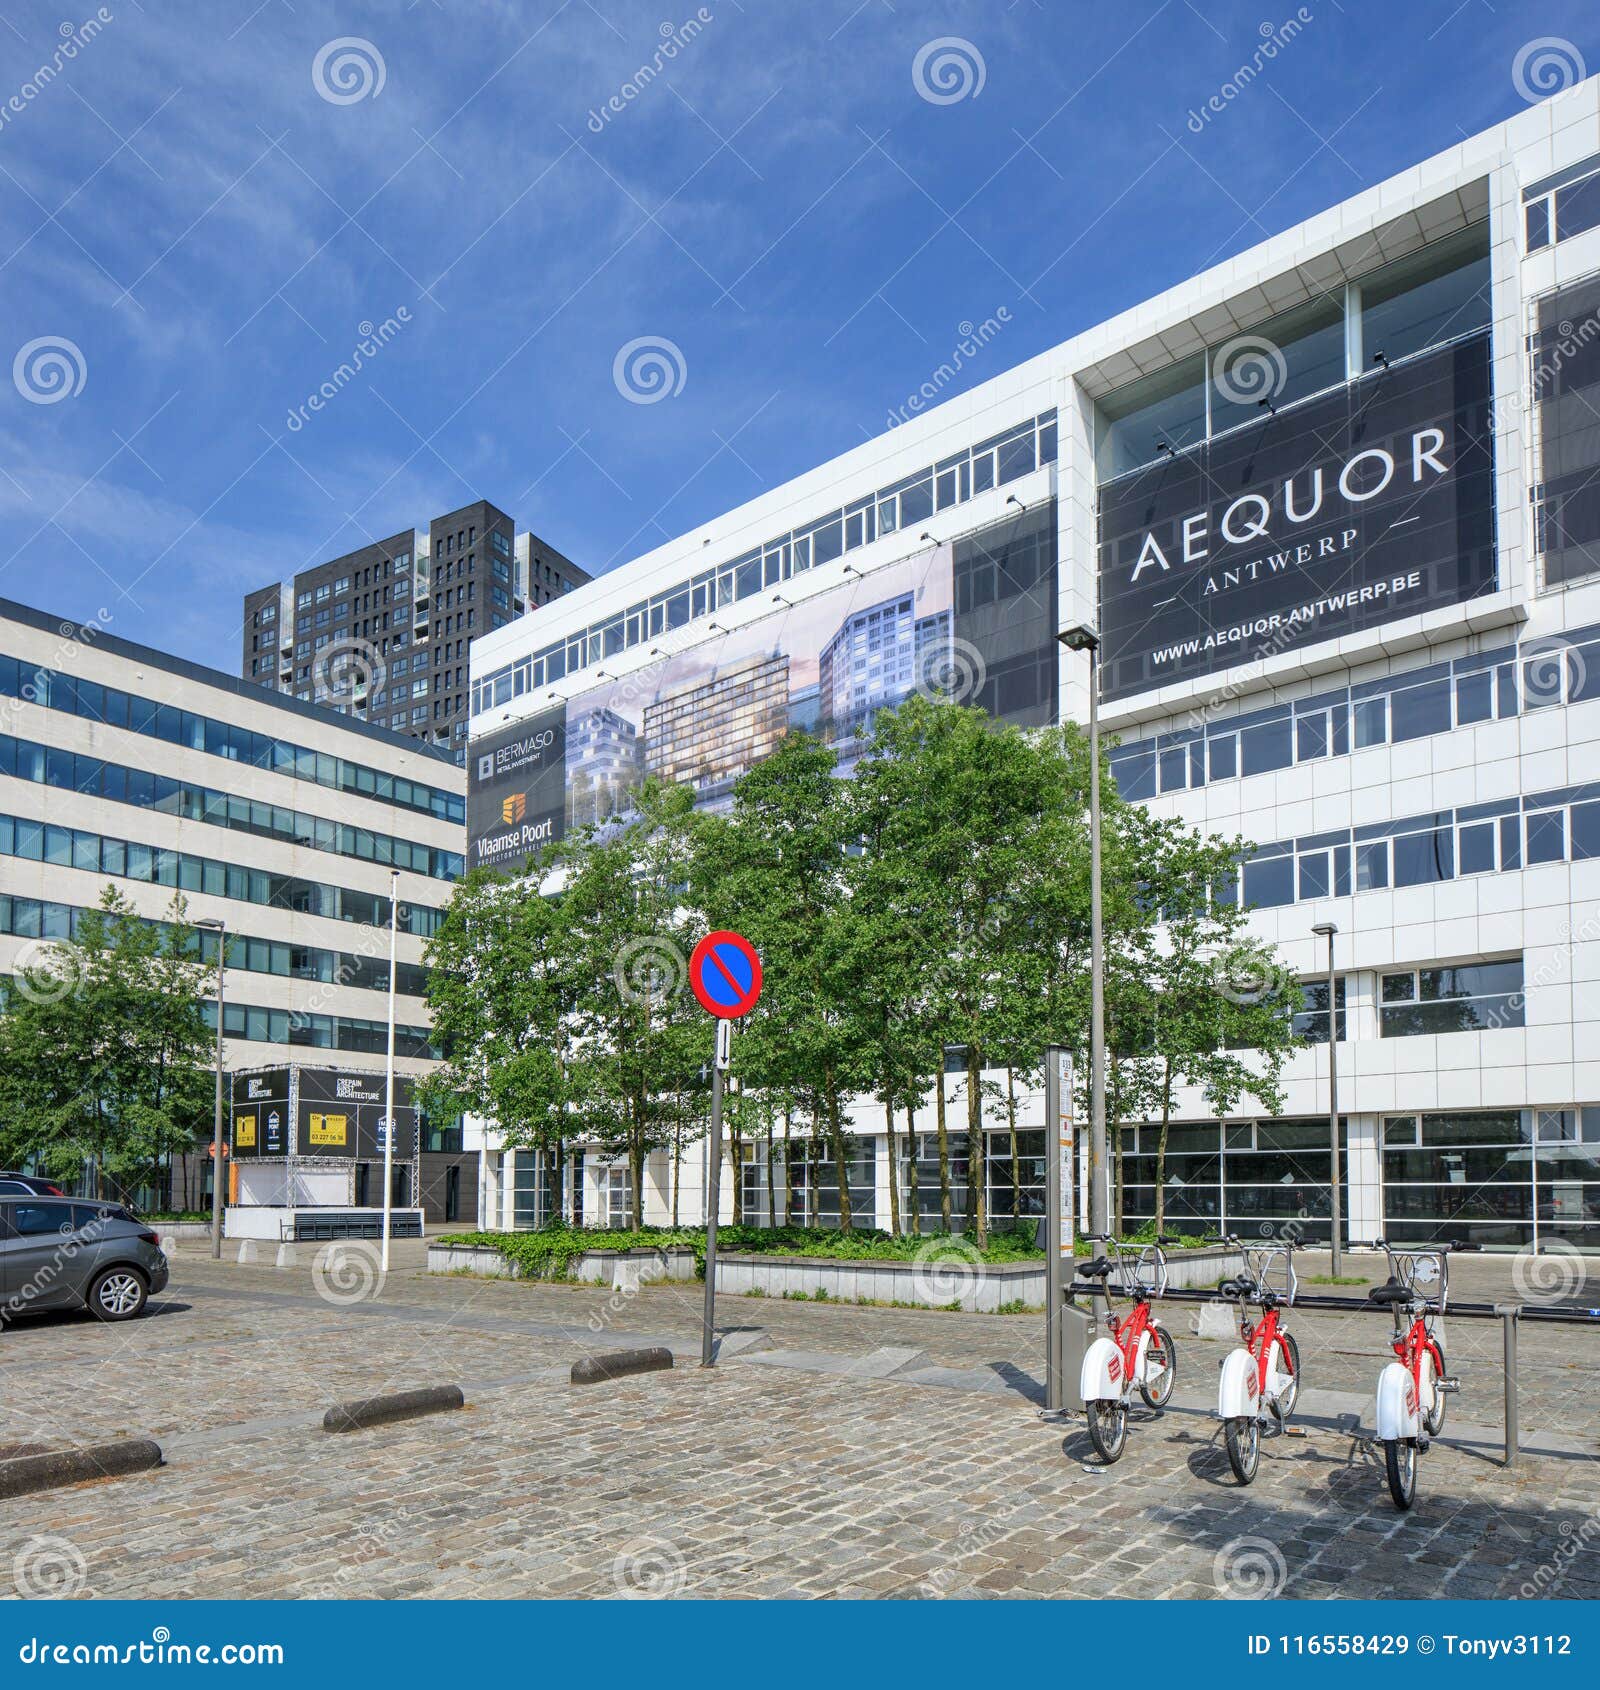 https://thumbs.dreamstime.com/z/antwerp-may-modern-architecture-city-center-wwii-suffered-considerable-damage-v-bombs-recent-years-noteworthy-116558429.jpg